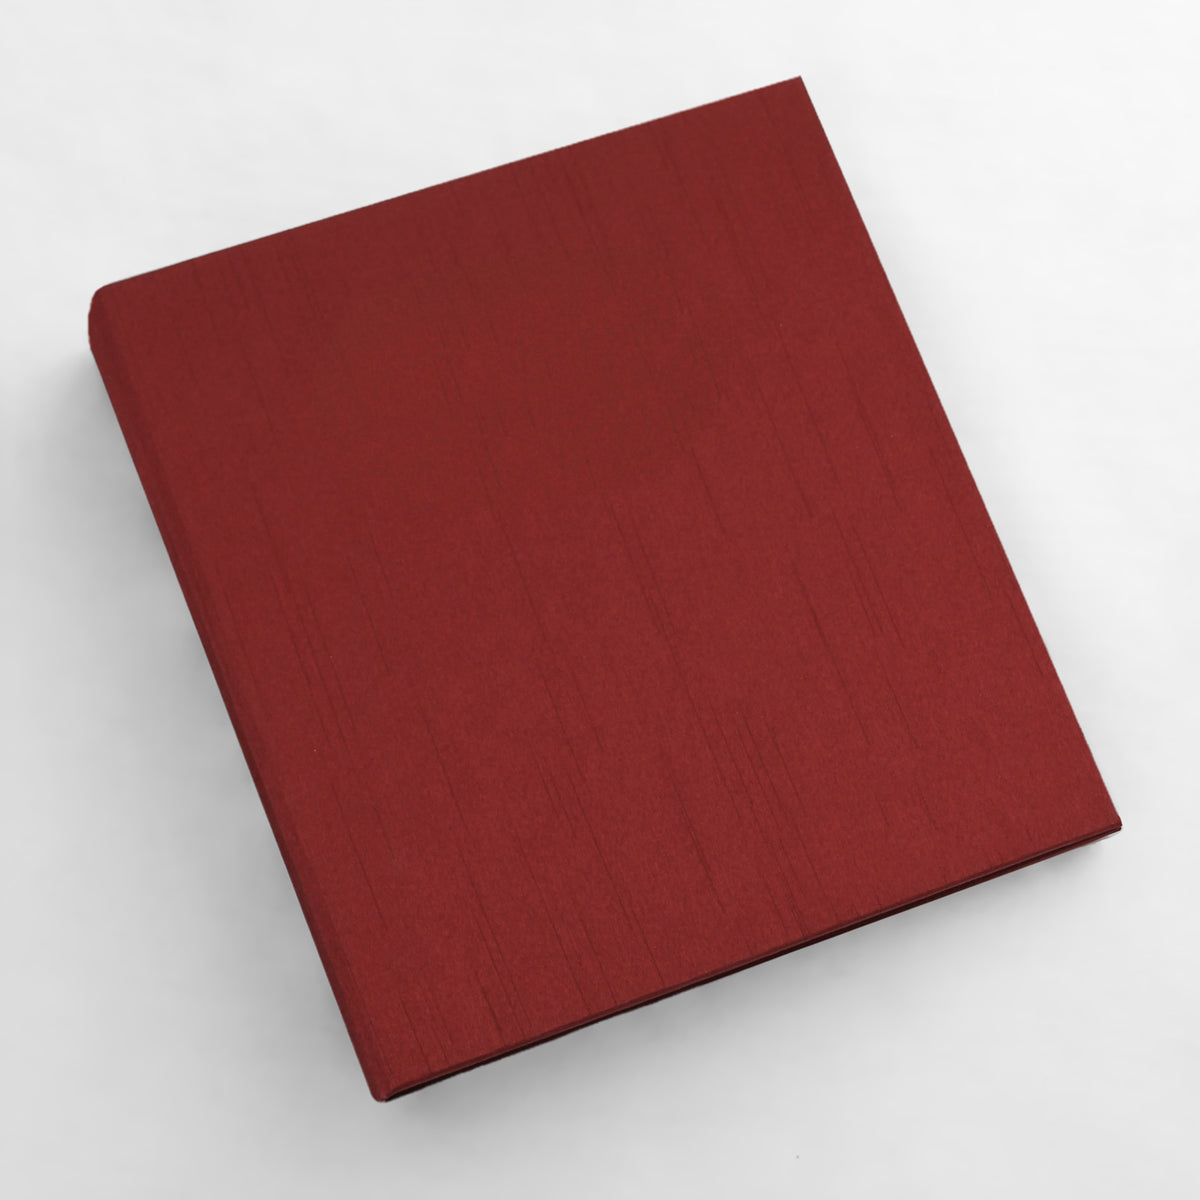 Large Photo Binder For 4x6 Photos | Cover: Garnet Silk | Available Personalized